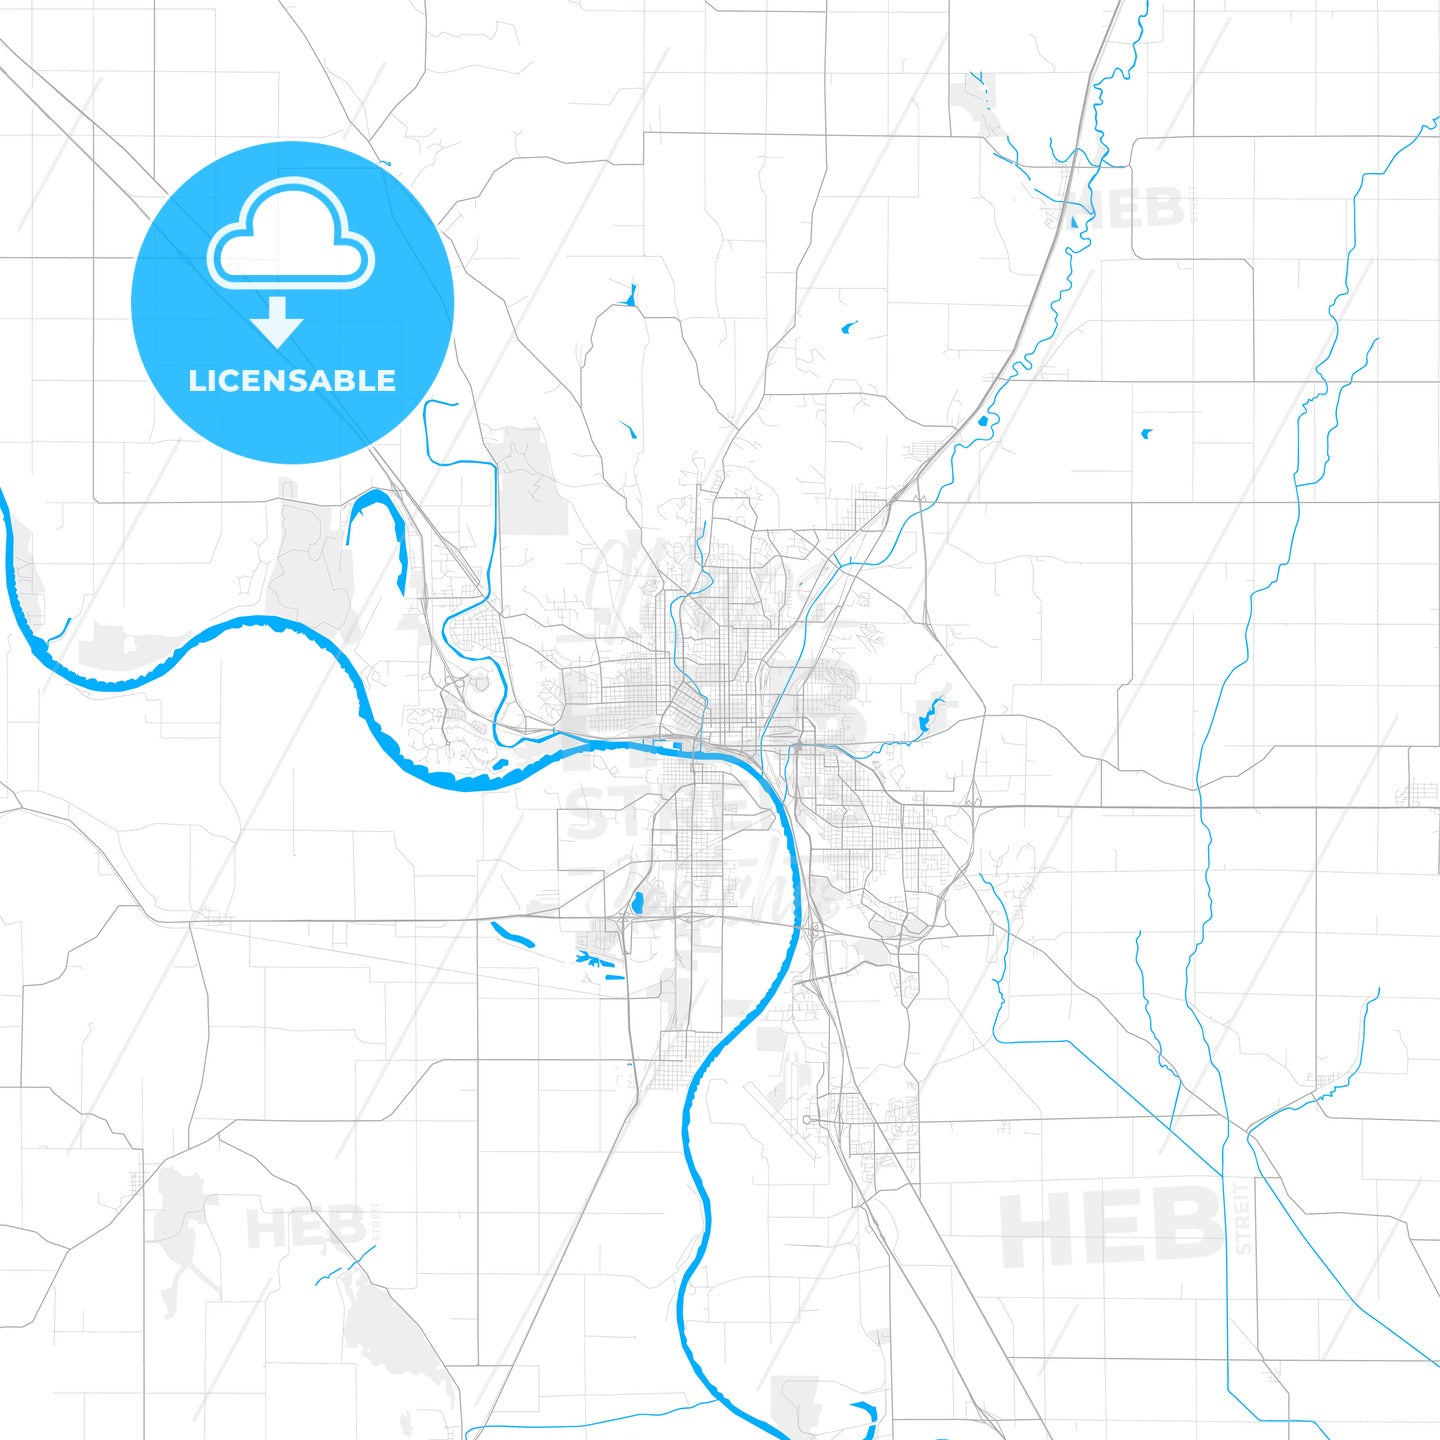 Rich detailed vector map of Sioux City, Iowa, USA